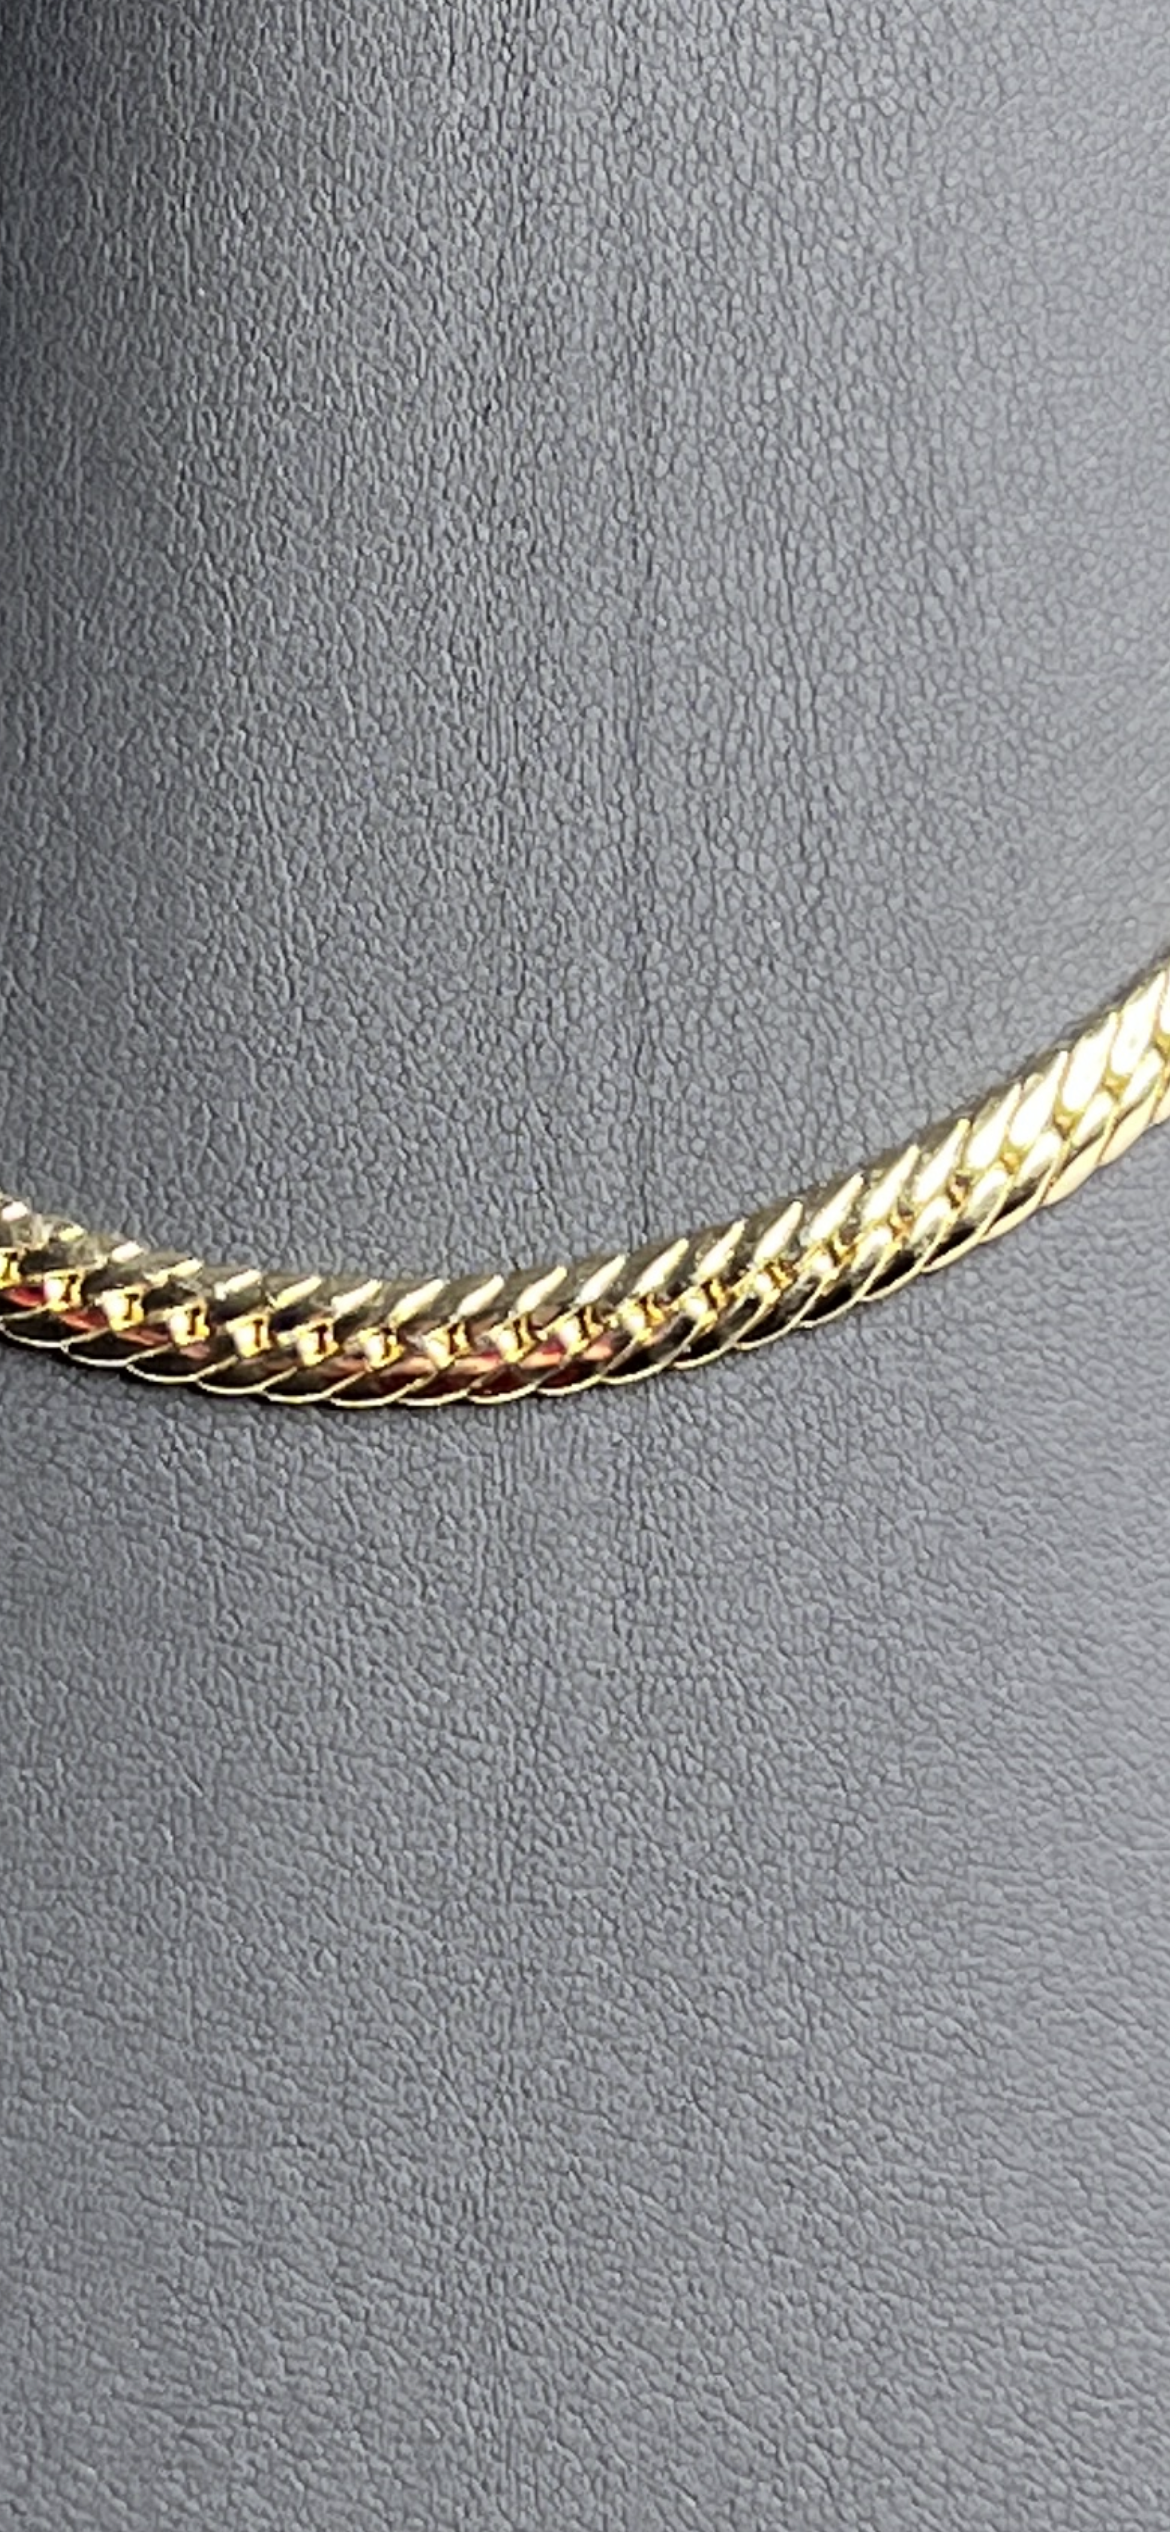 snake Chain 14k Gold Plated